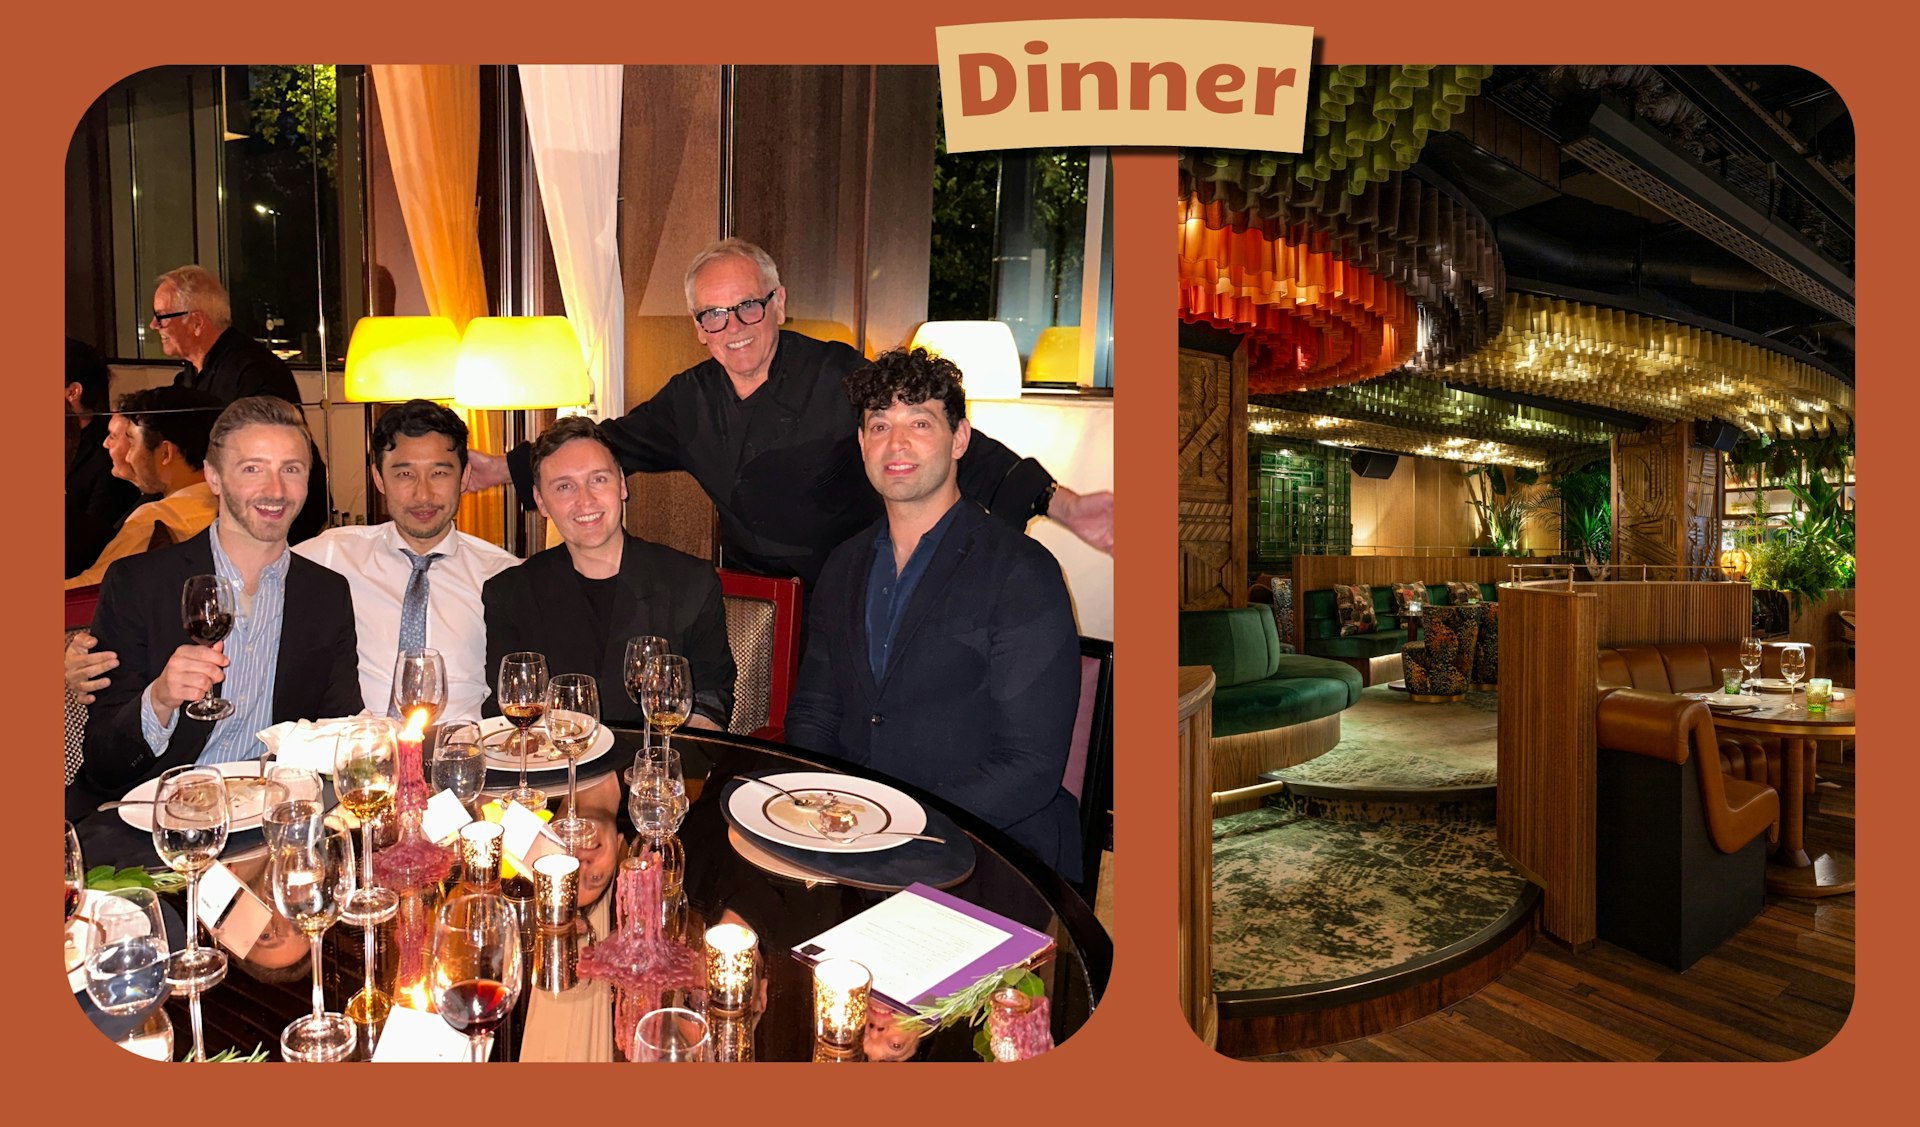 L: A group of young men sit at a dinner table with celebrity chef Wolfgang Puck. R: The Amazonain-inspired decor of London restaurant Amazonica